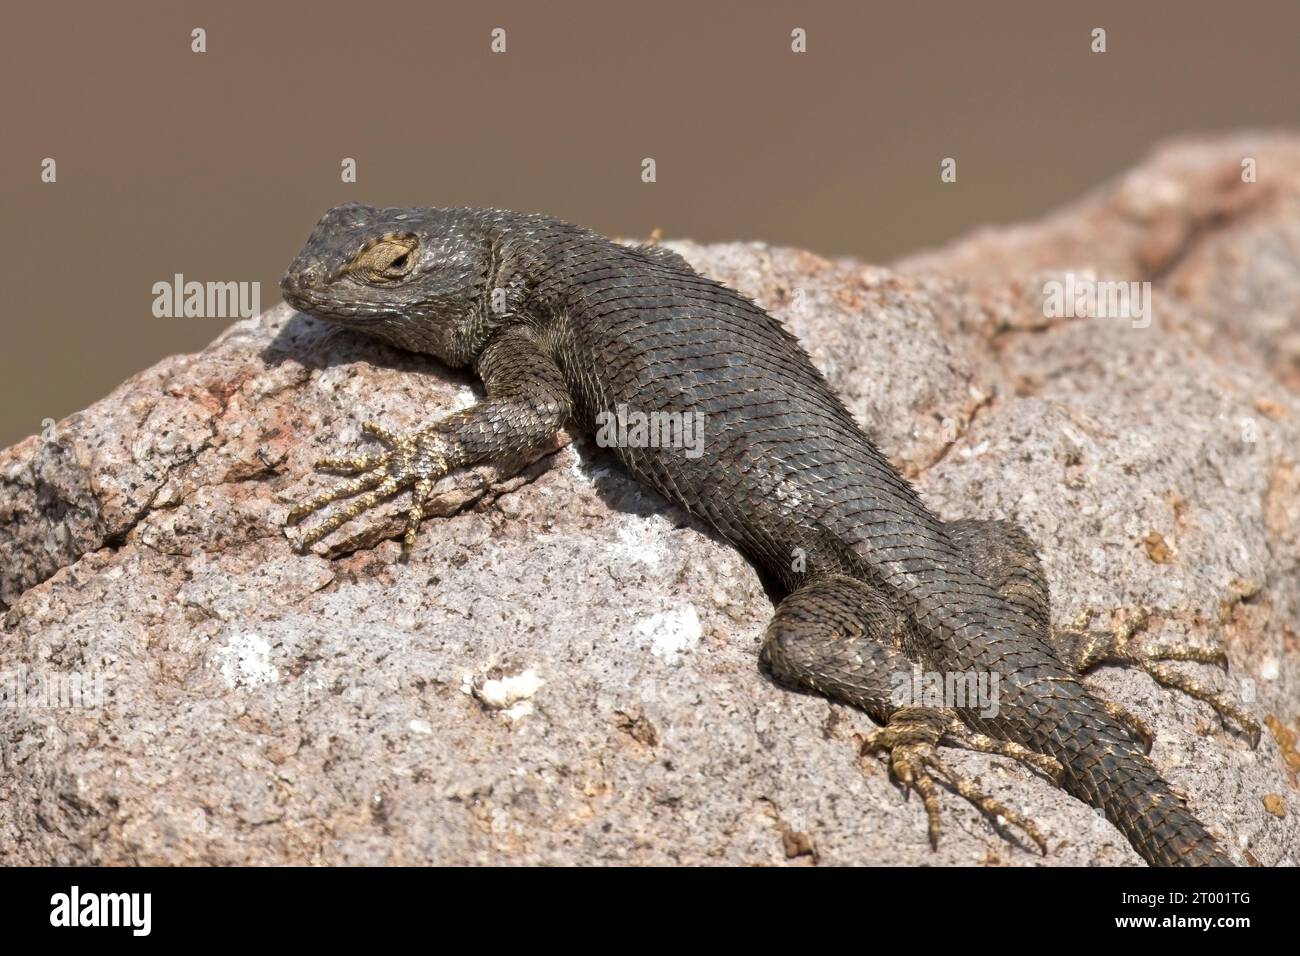 Close up of small lizard on a rock. Stock Photo